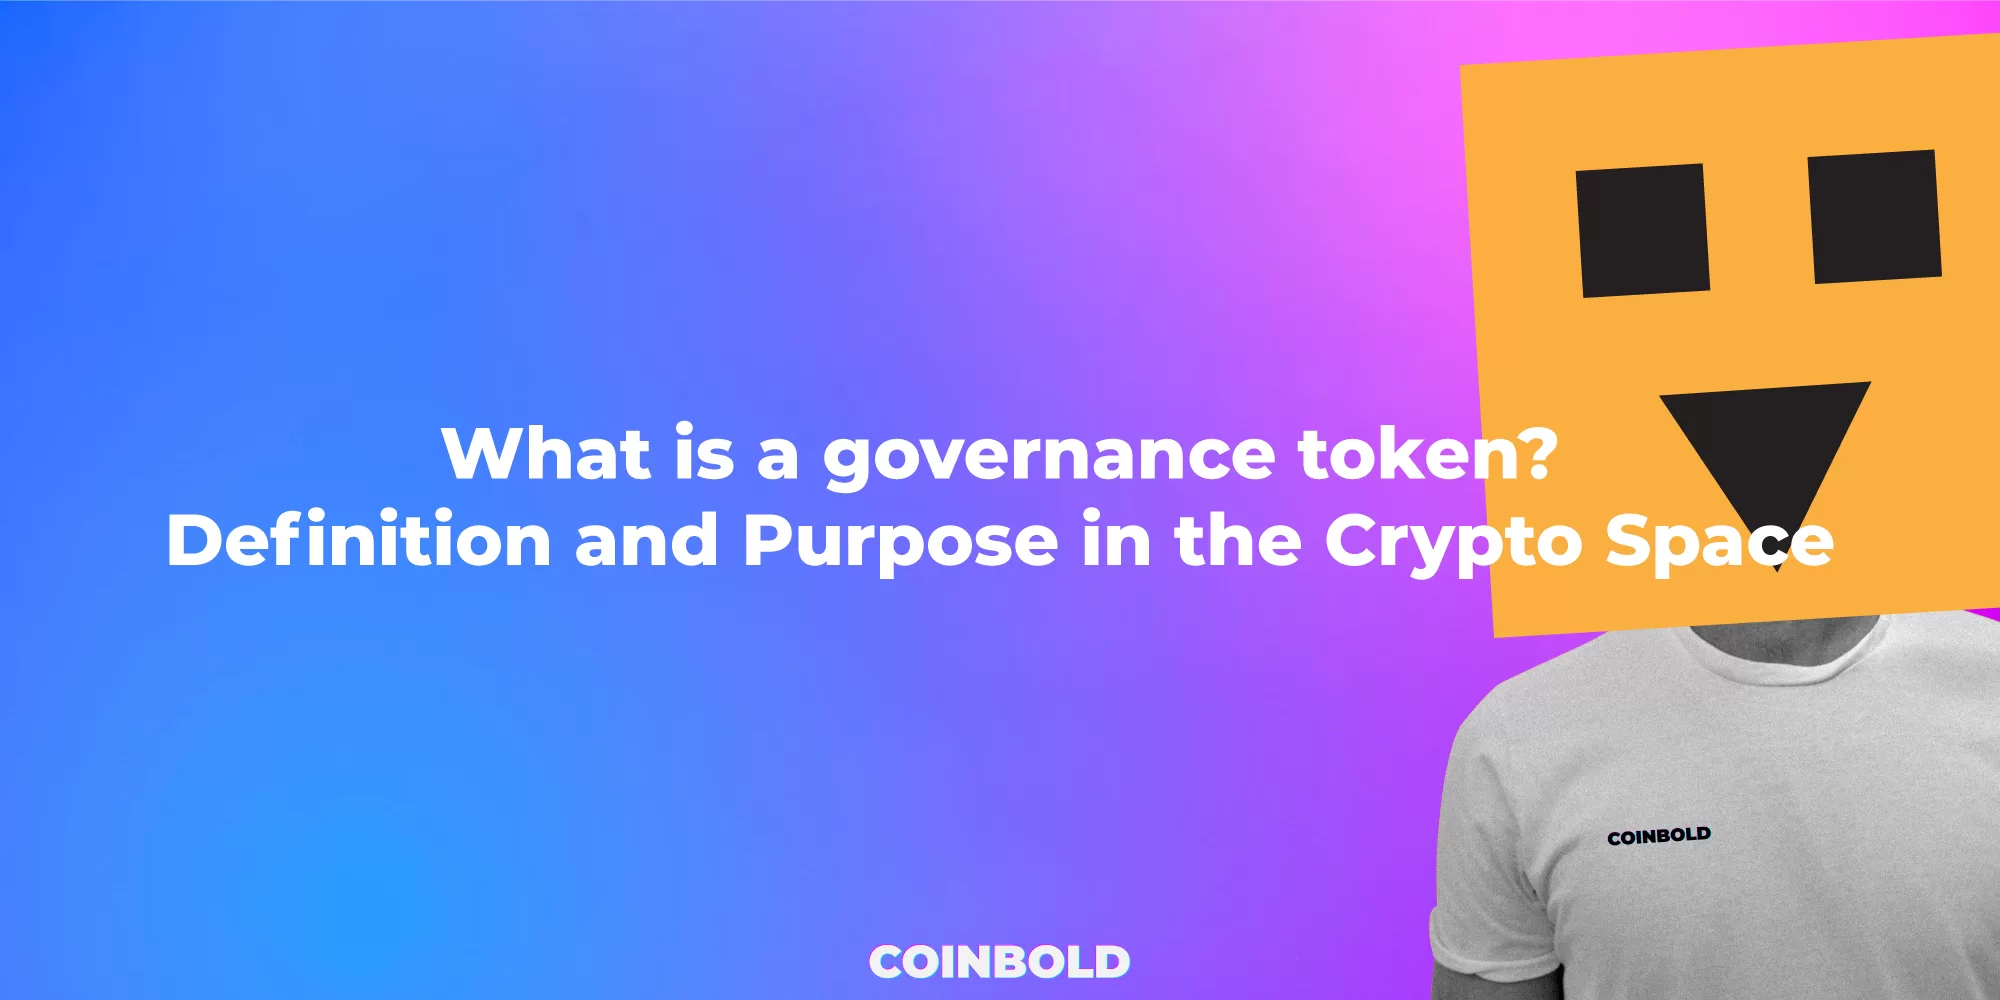 What is a governance token? Definition and Purpose in the Crypto Space